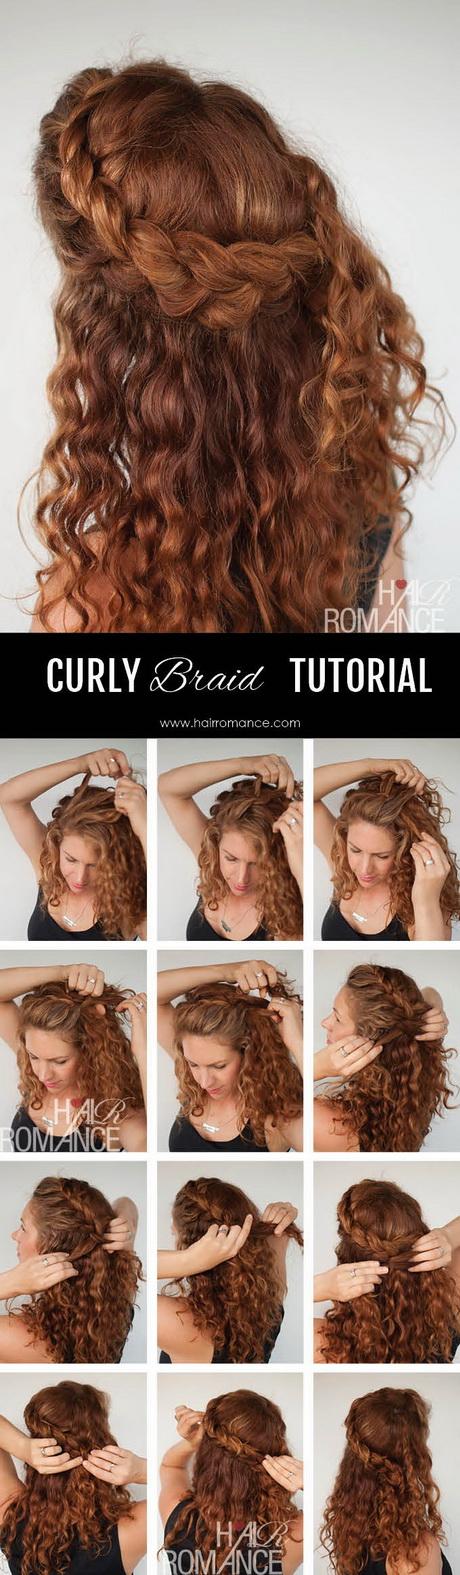 Braids and curls hairstyles braids-and-curls-hairstyles-25_3